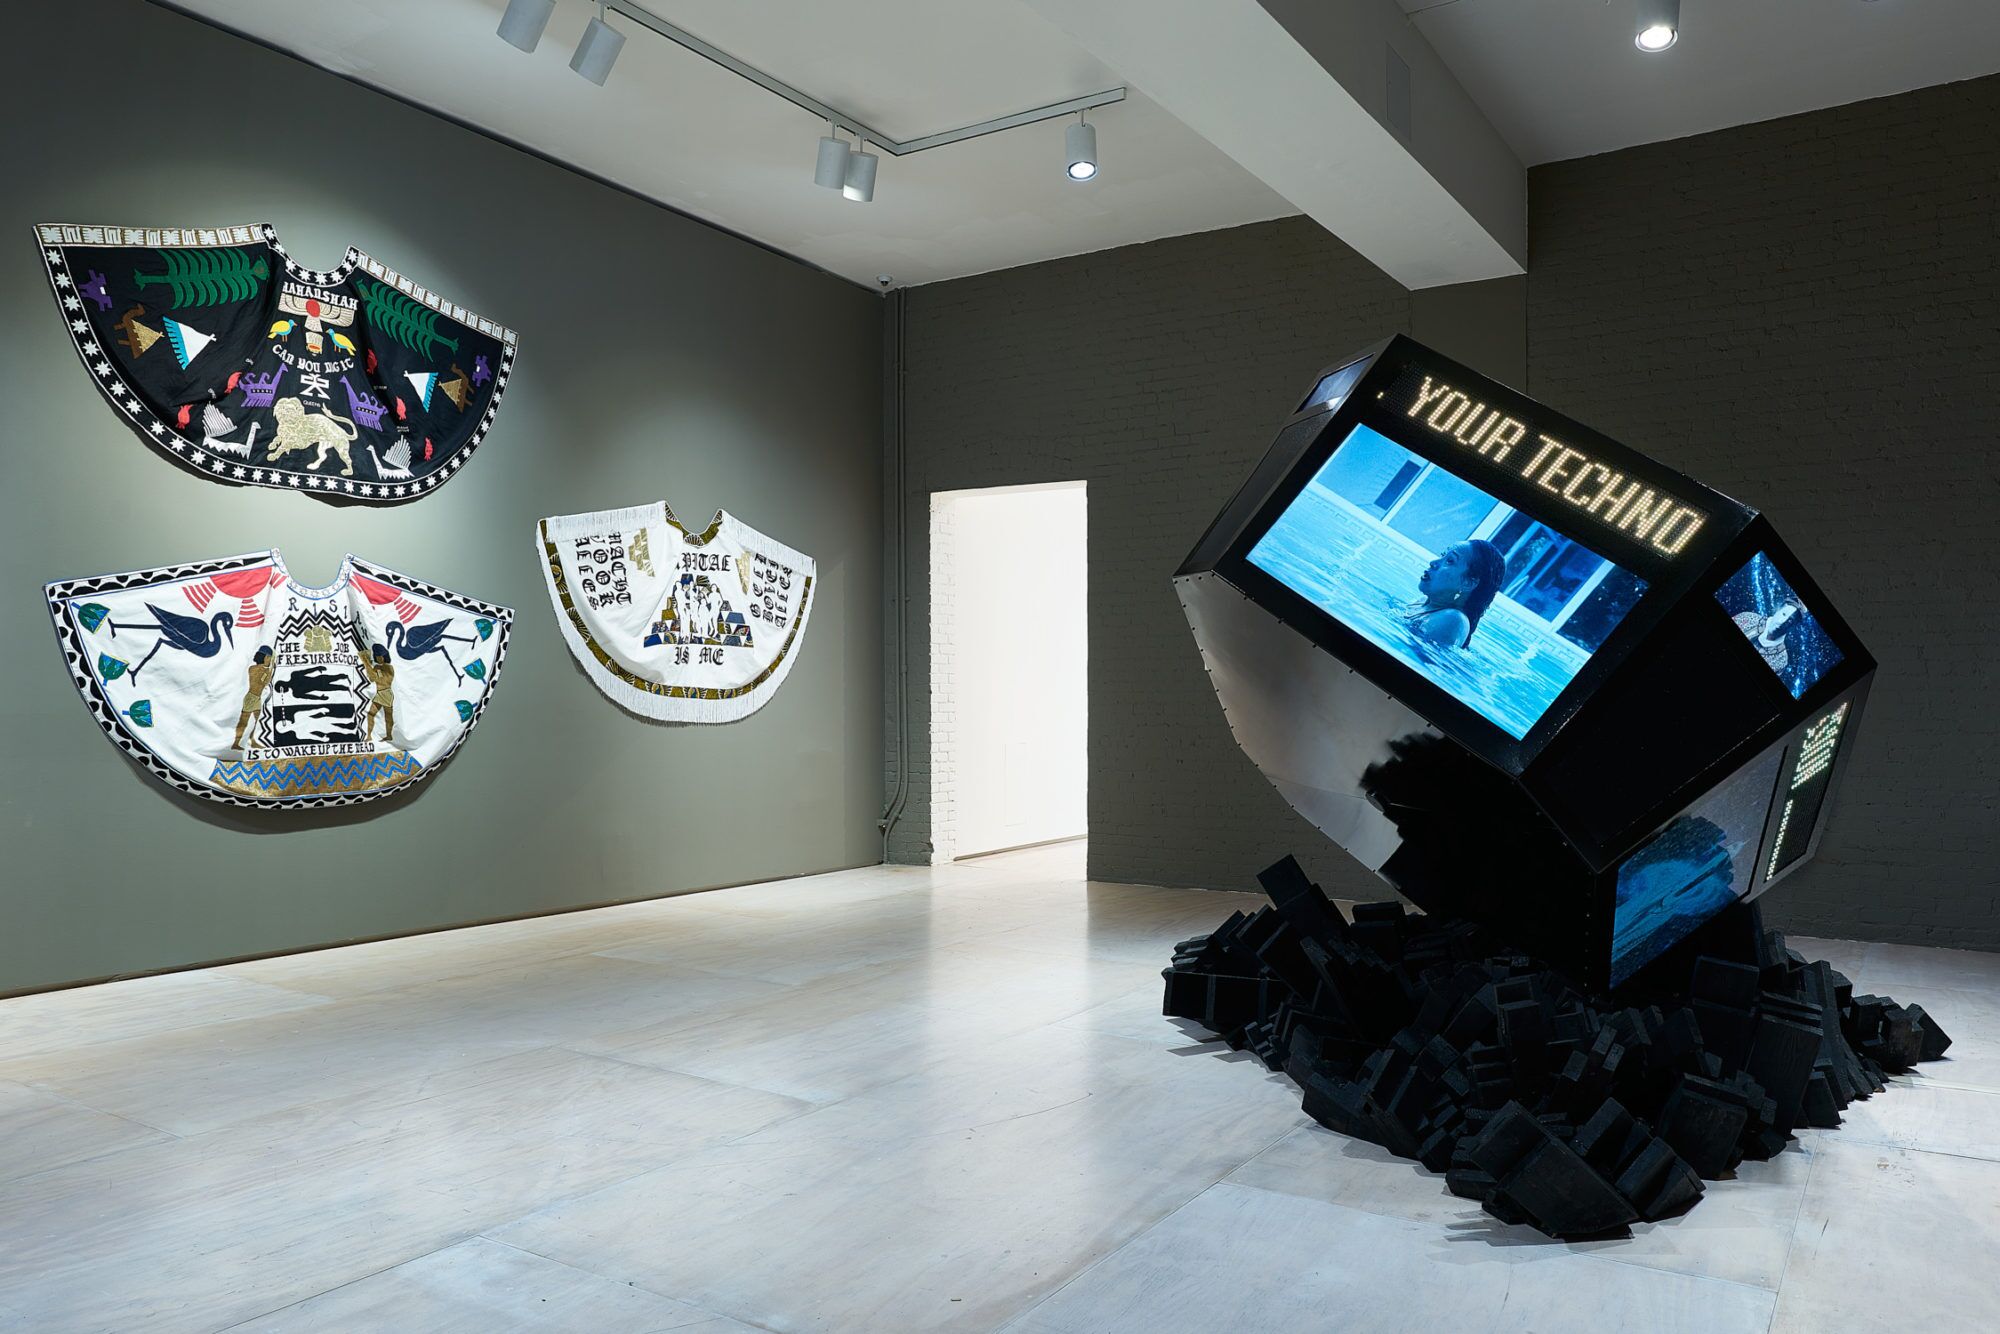 A gallery view shows capes pinned to a wall and a Jumbotron type object looking as if it crashed into the floor.